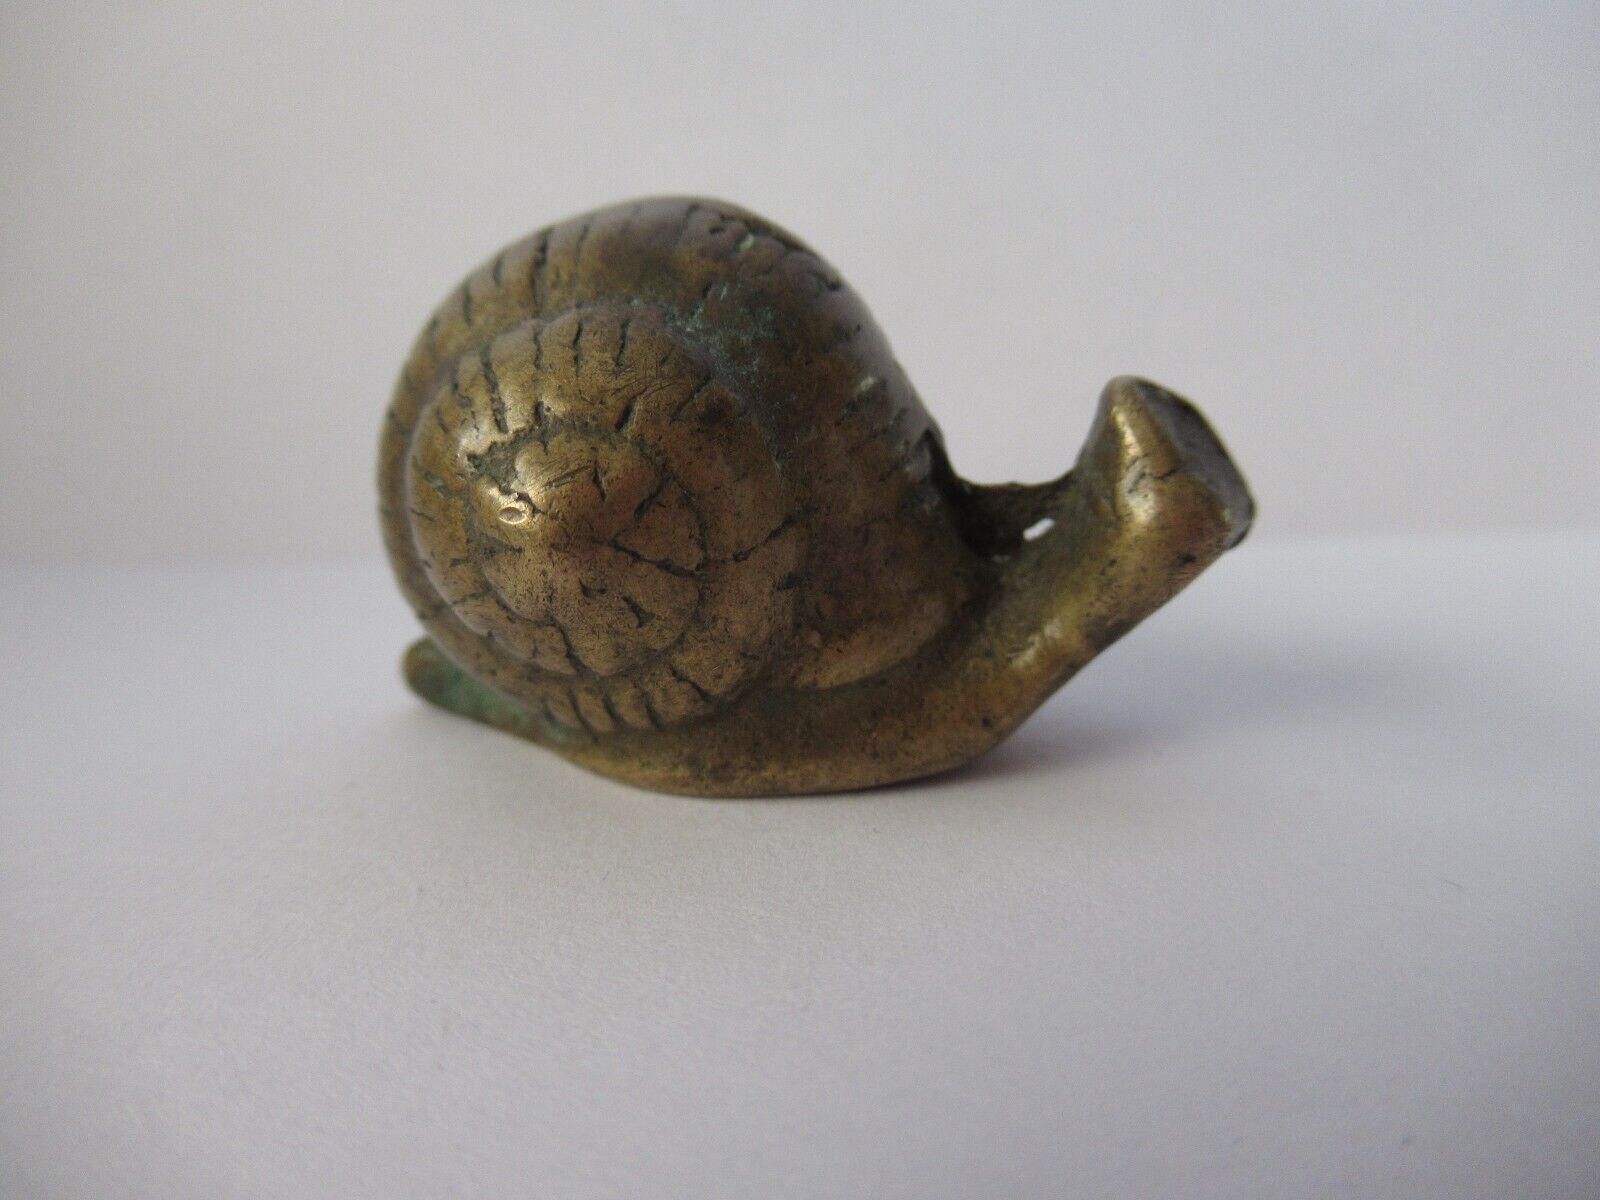 Vintage Brass Ornate Snail Figural Figurine Paperweight 1-1/2 inches long